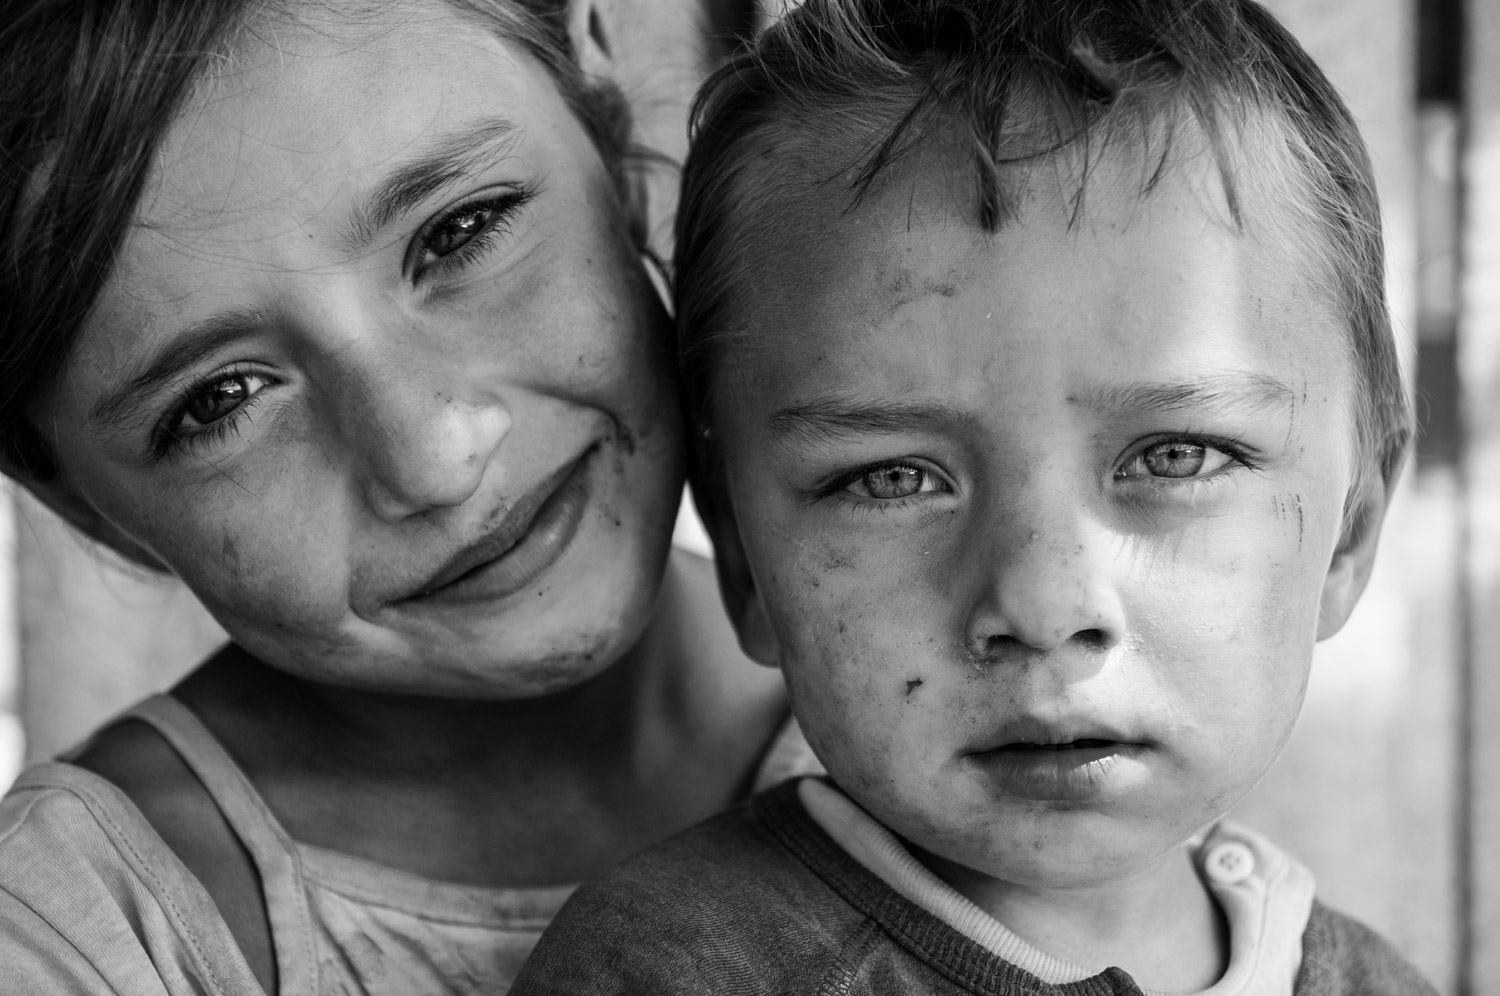 Brother and sister portrait. Black and white photo by Ellis photography. Close up of a boy and a girl with big eyes.